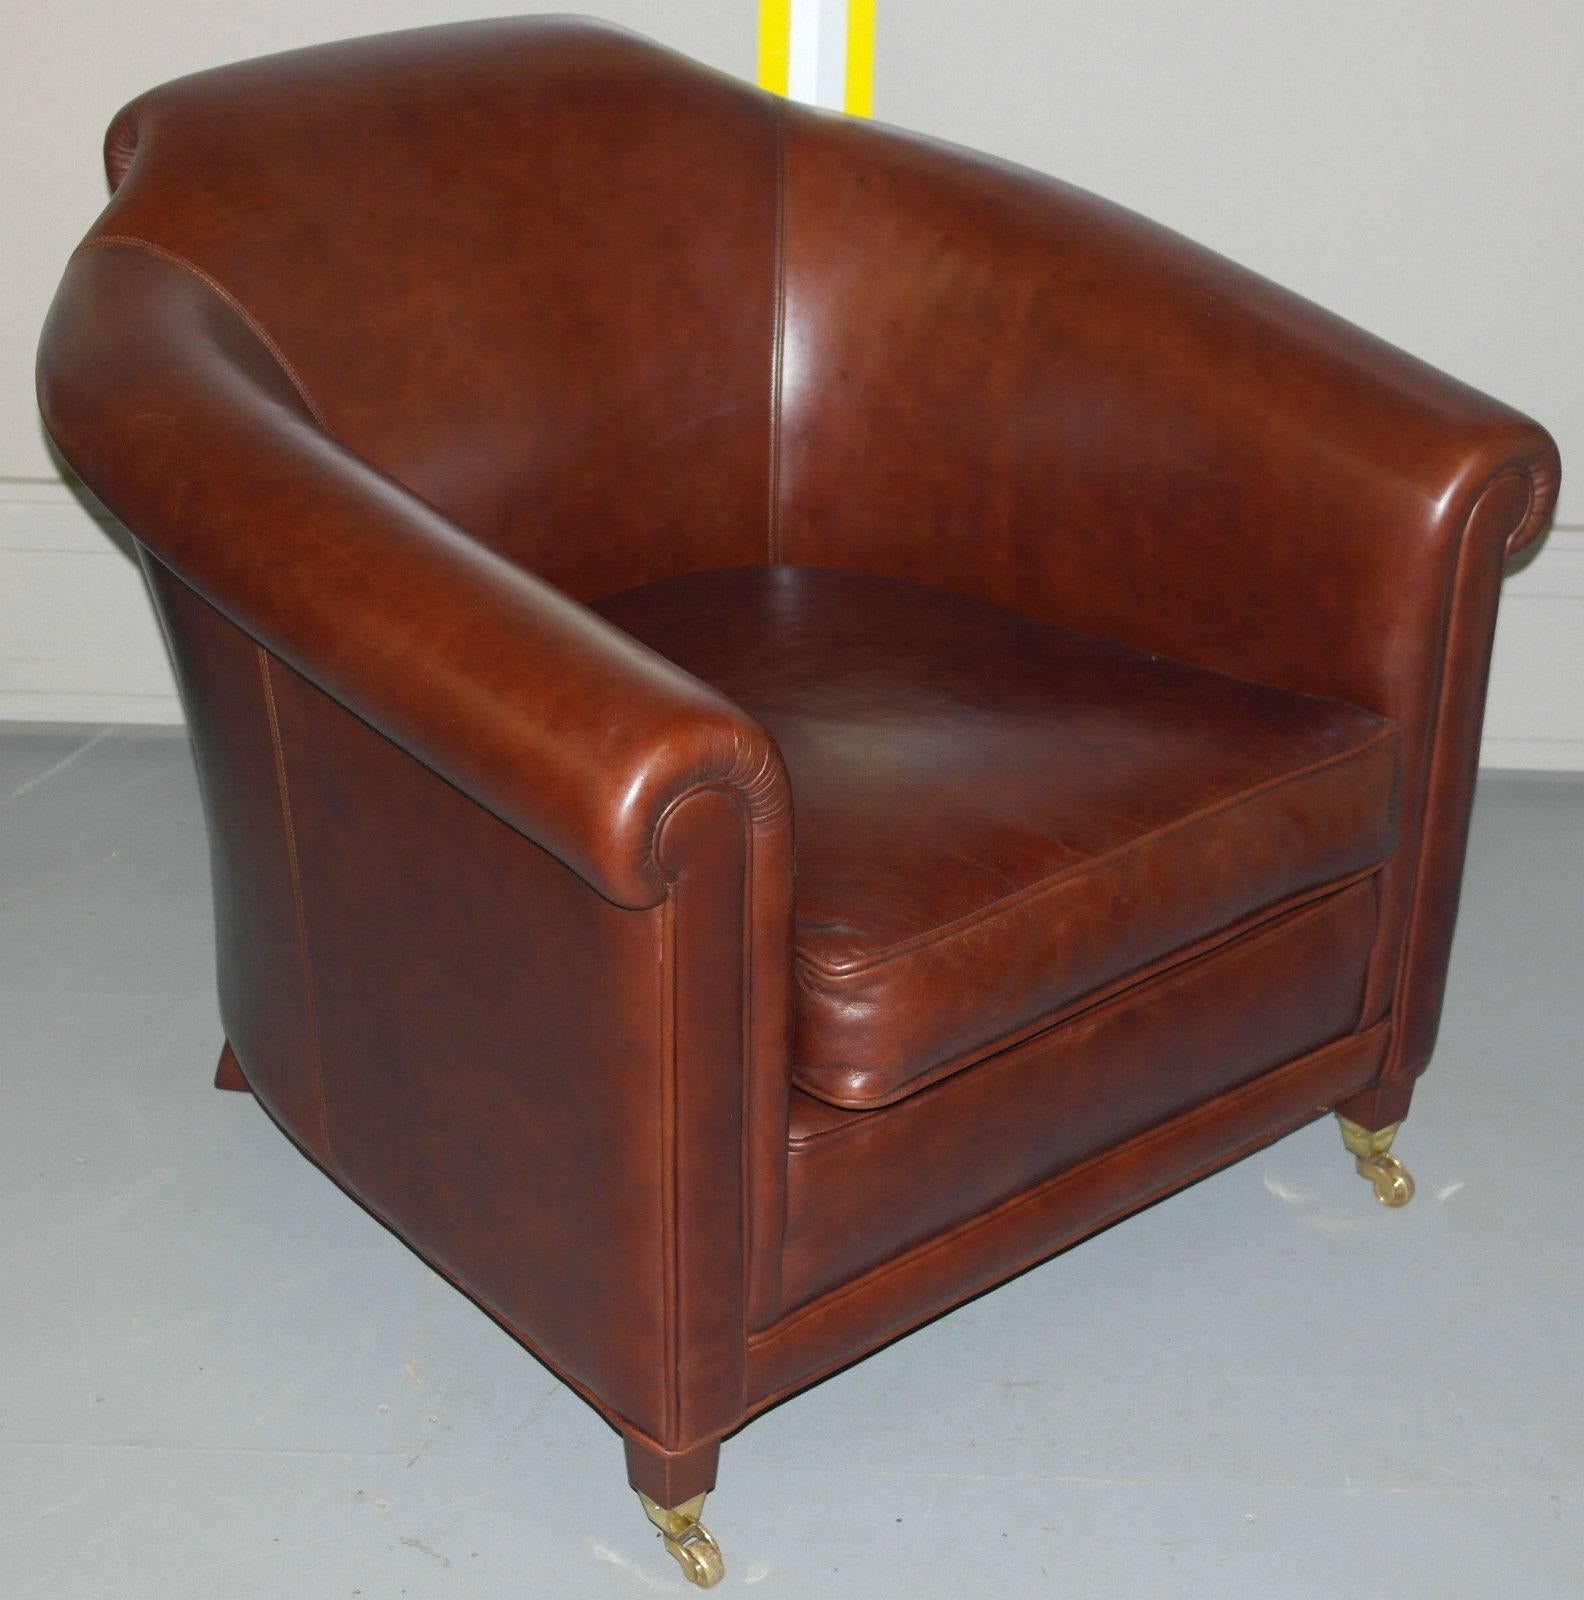 We are delighted to offer for sale this lovely new Tusting Arnold aged brown leather club armchair RRP £1800

This piece was bought and delivered but never used, its sat in a corner study for the last year being admired by all

We have given it